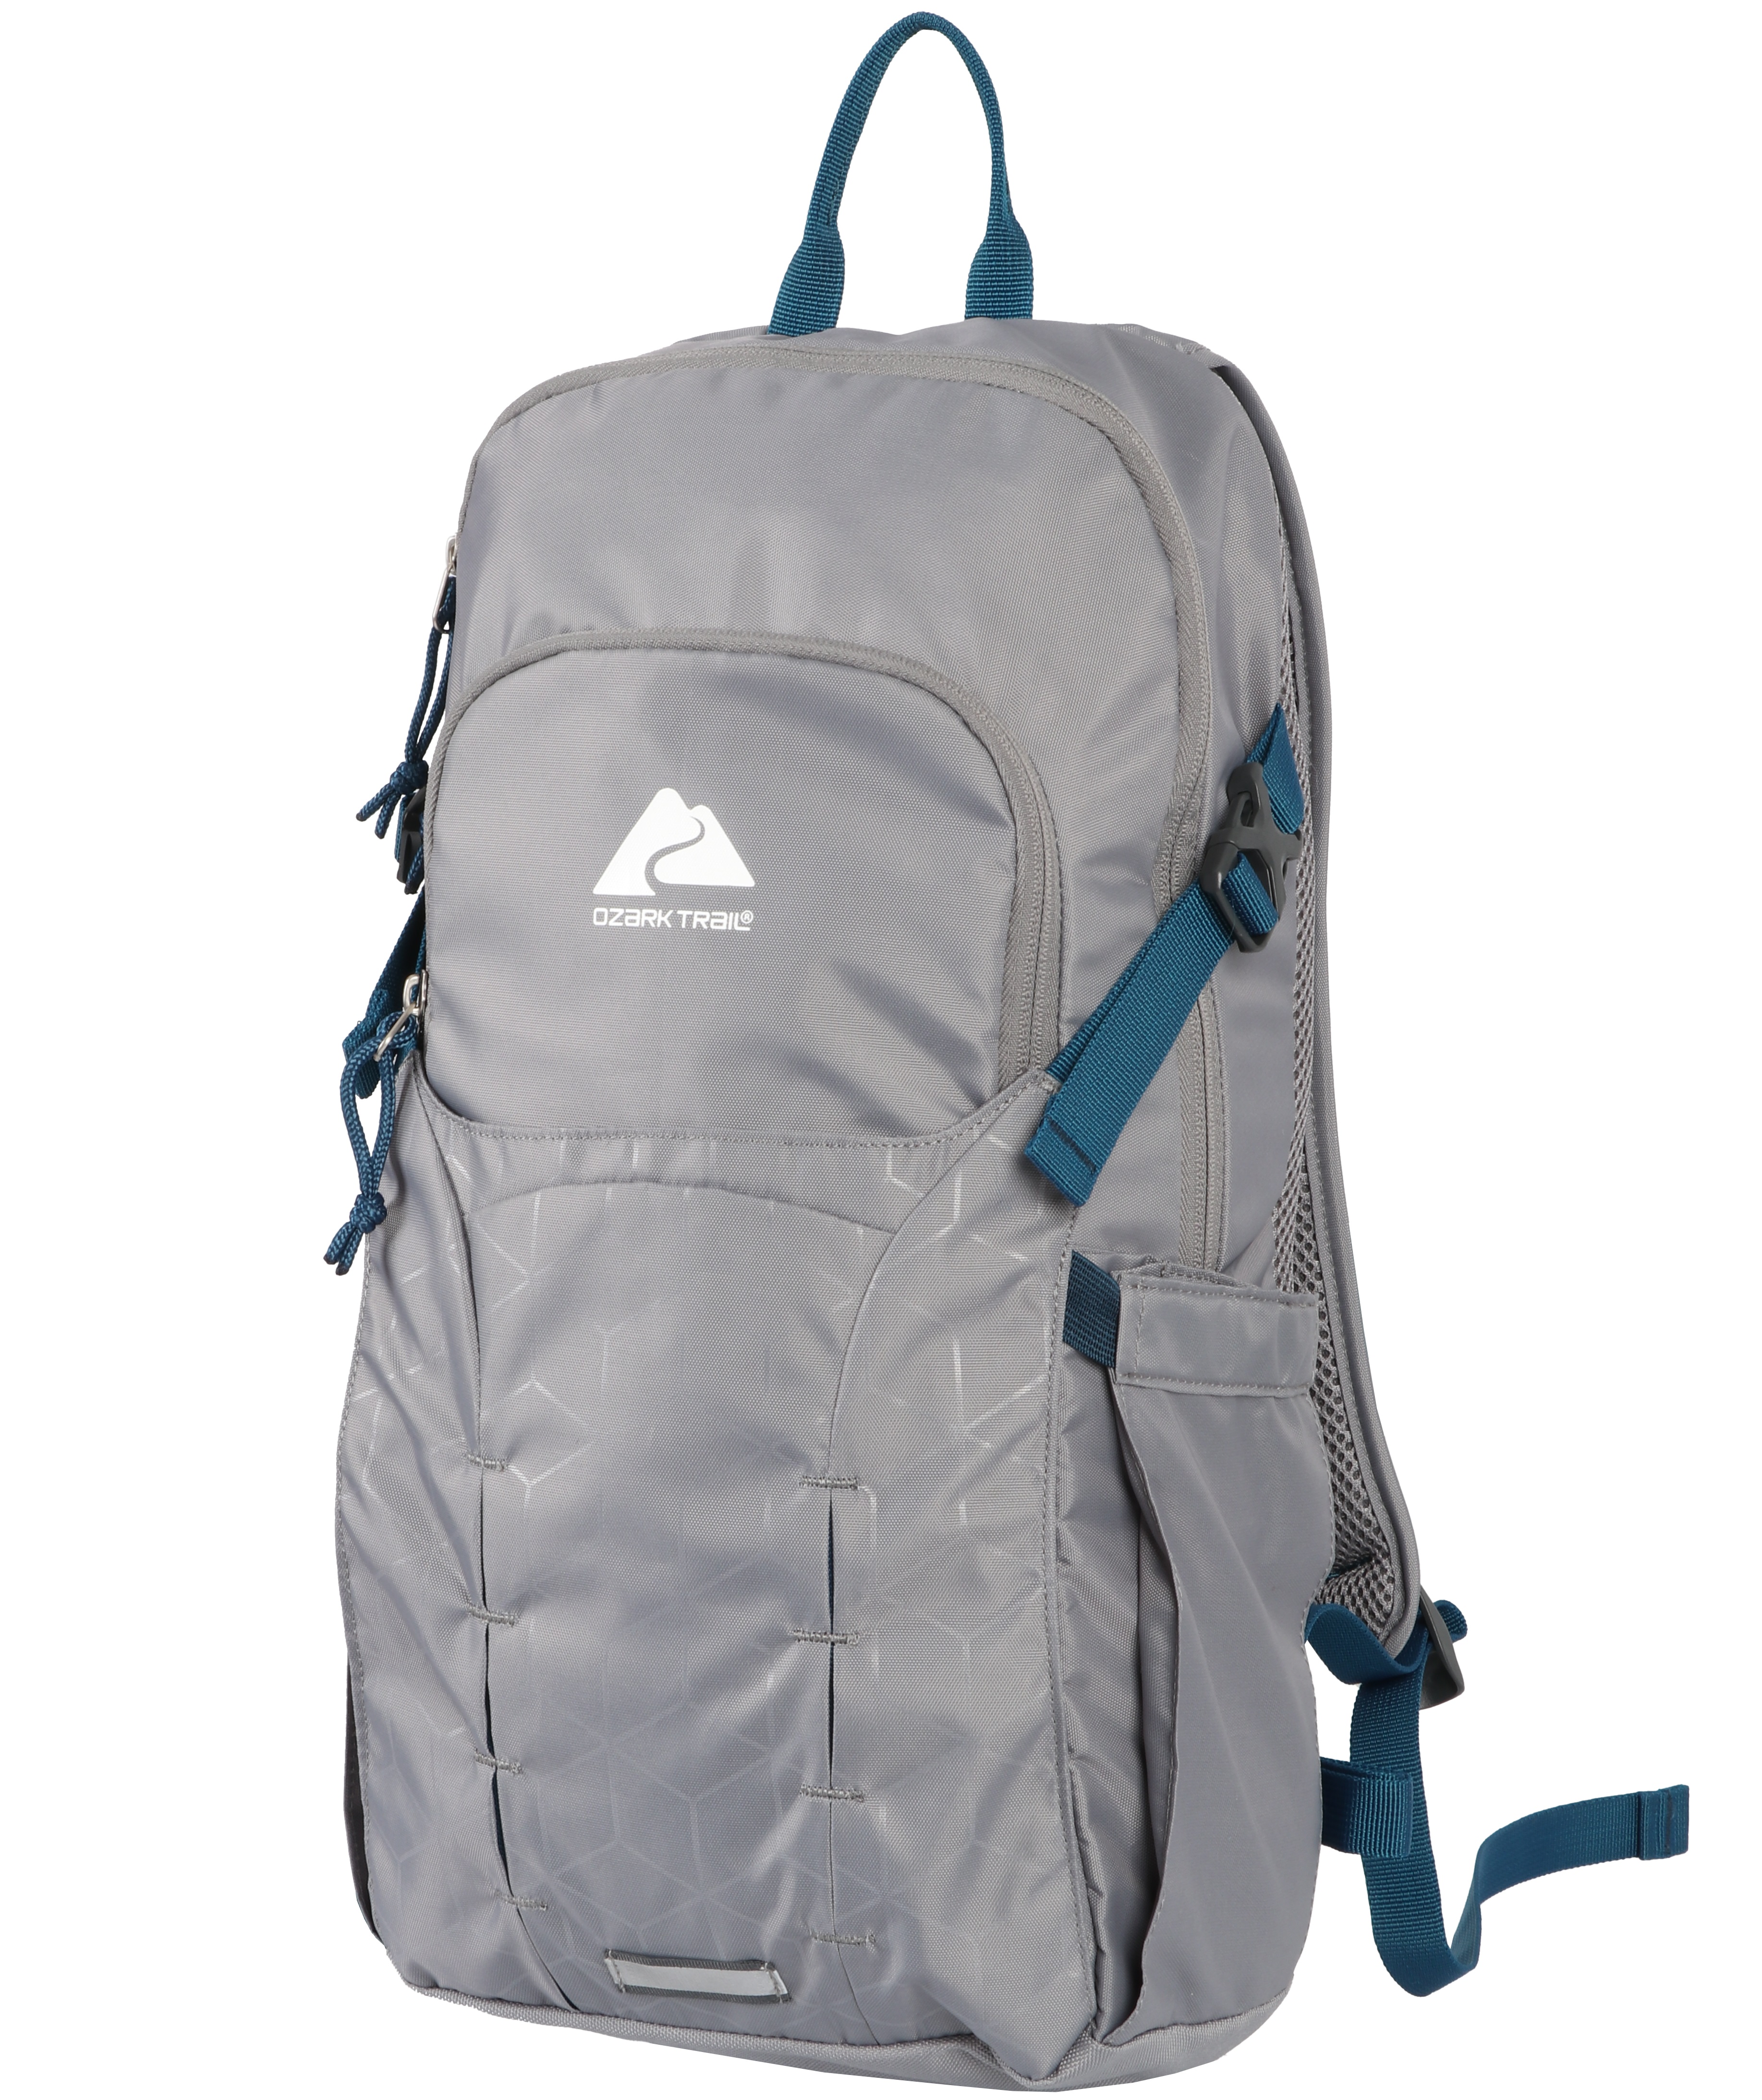 Ozark Trail 14 Ltr Hydration Pack, with Water Reservoir, Grey Polyester - image 1 of 10